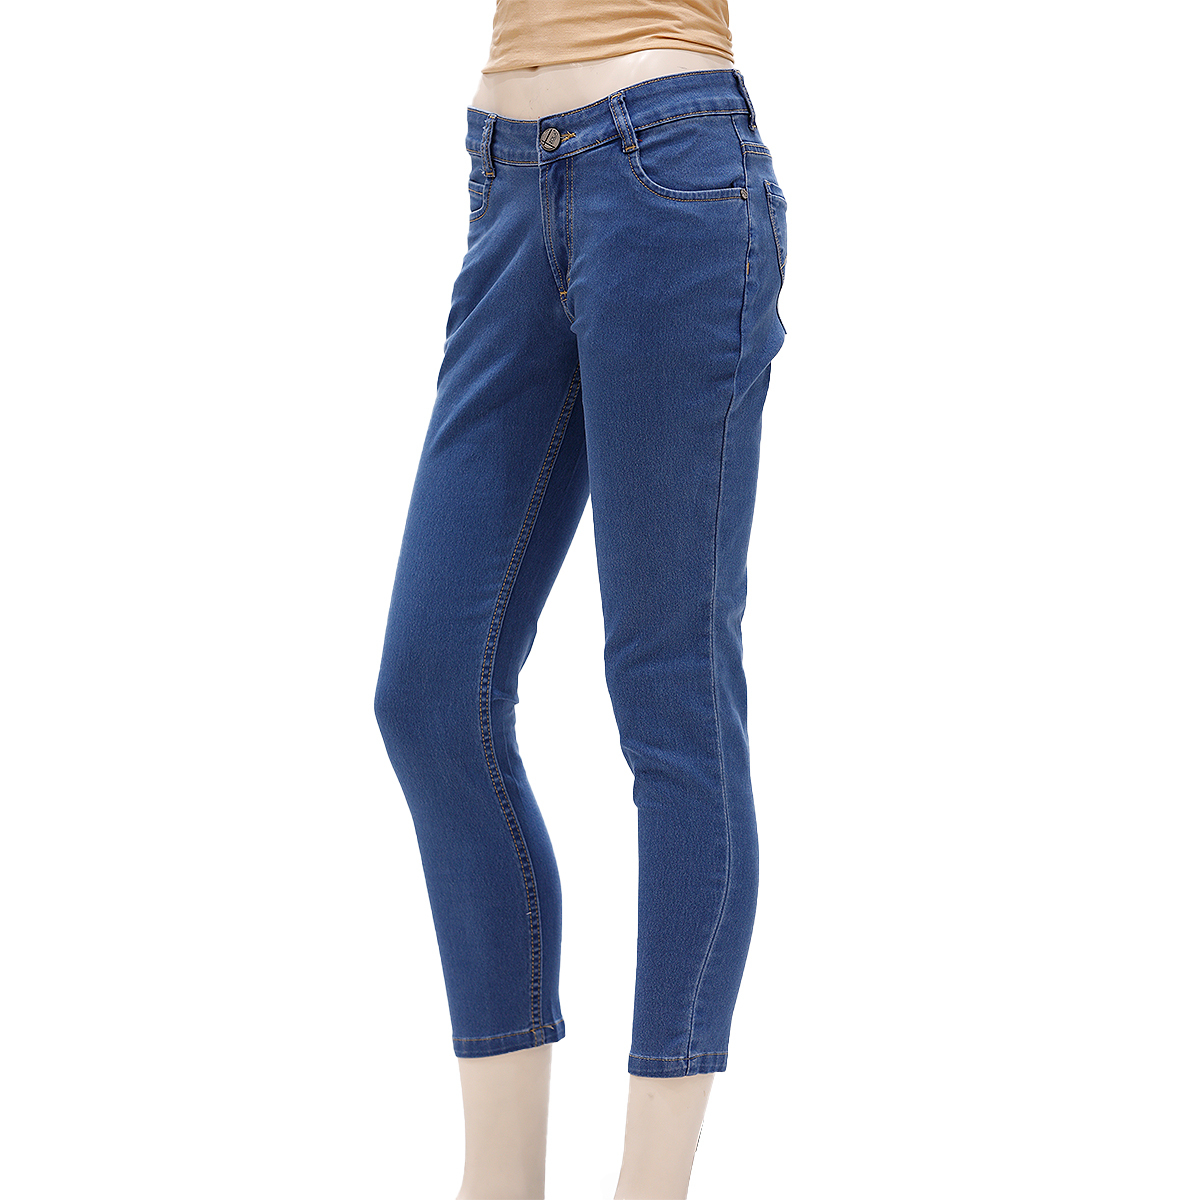 Zola Ankle Length Mid Waist Silky Finished Jeans With 1 Button Fly Front Zip Opening - Stone/Mid Blue, Size-34